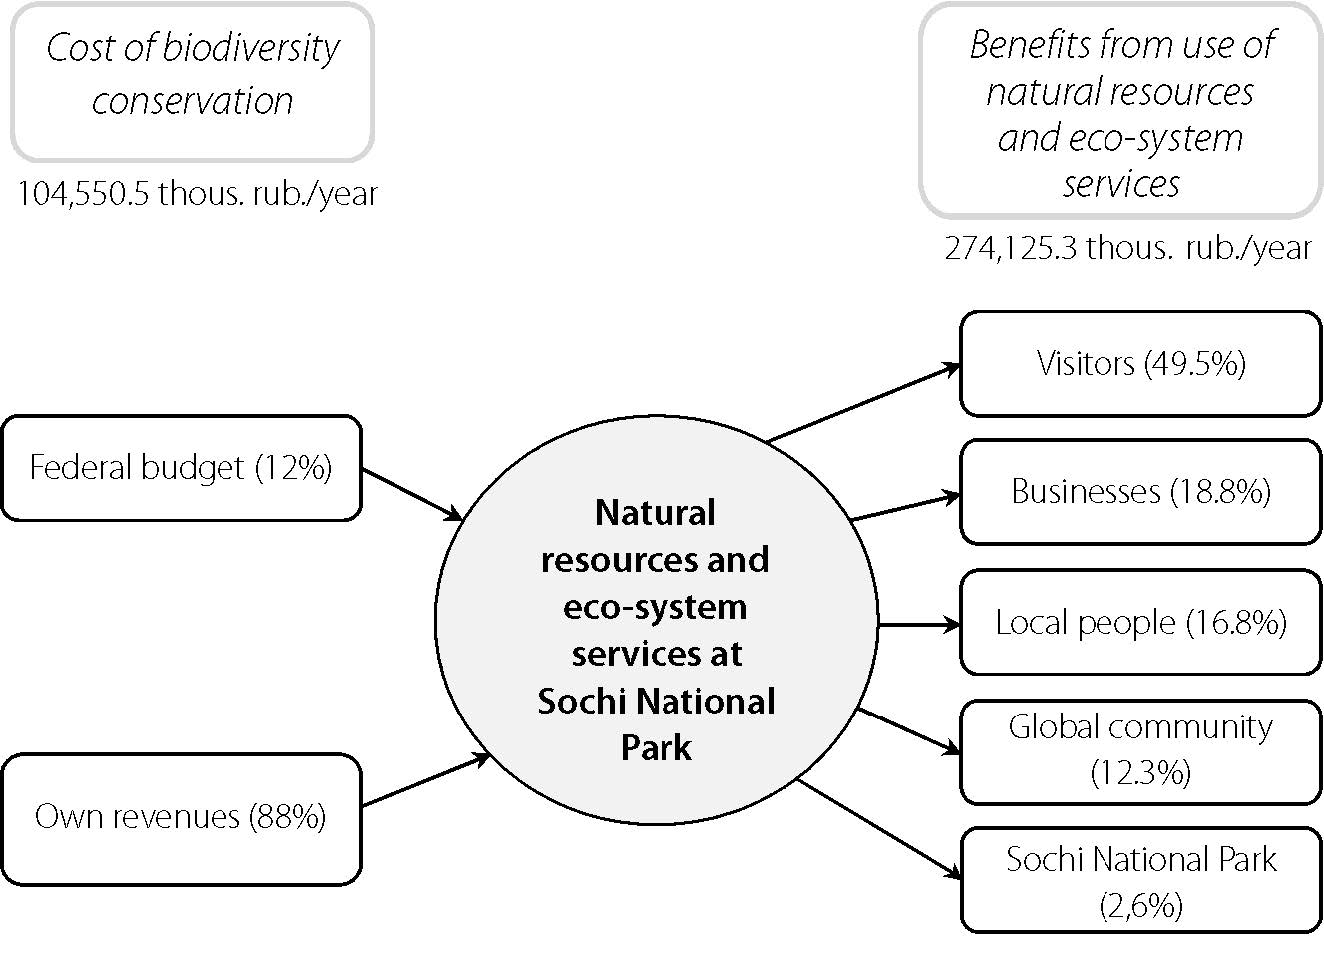 Cost of biodiversity preservation versus benefits obtained by specific receivers of income from consumption of natural resources and ecosystem services in 2006 (as exemplified by Sochi National Park)